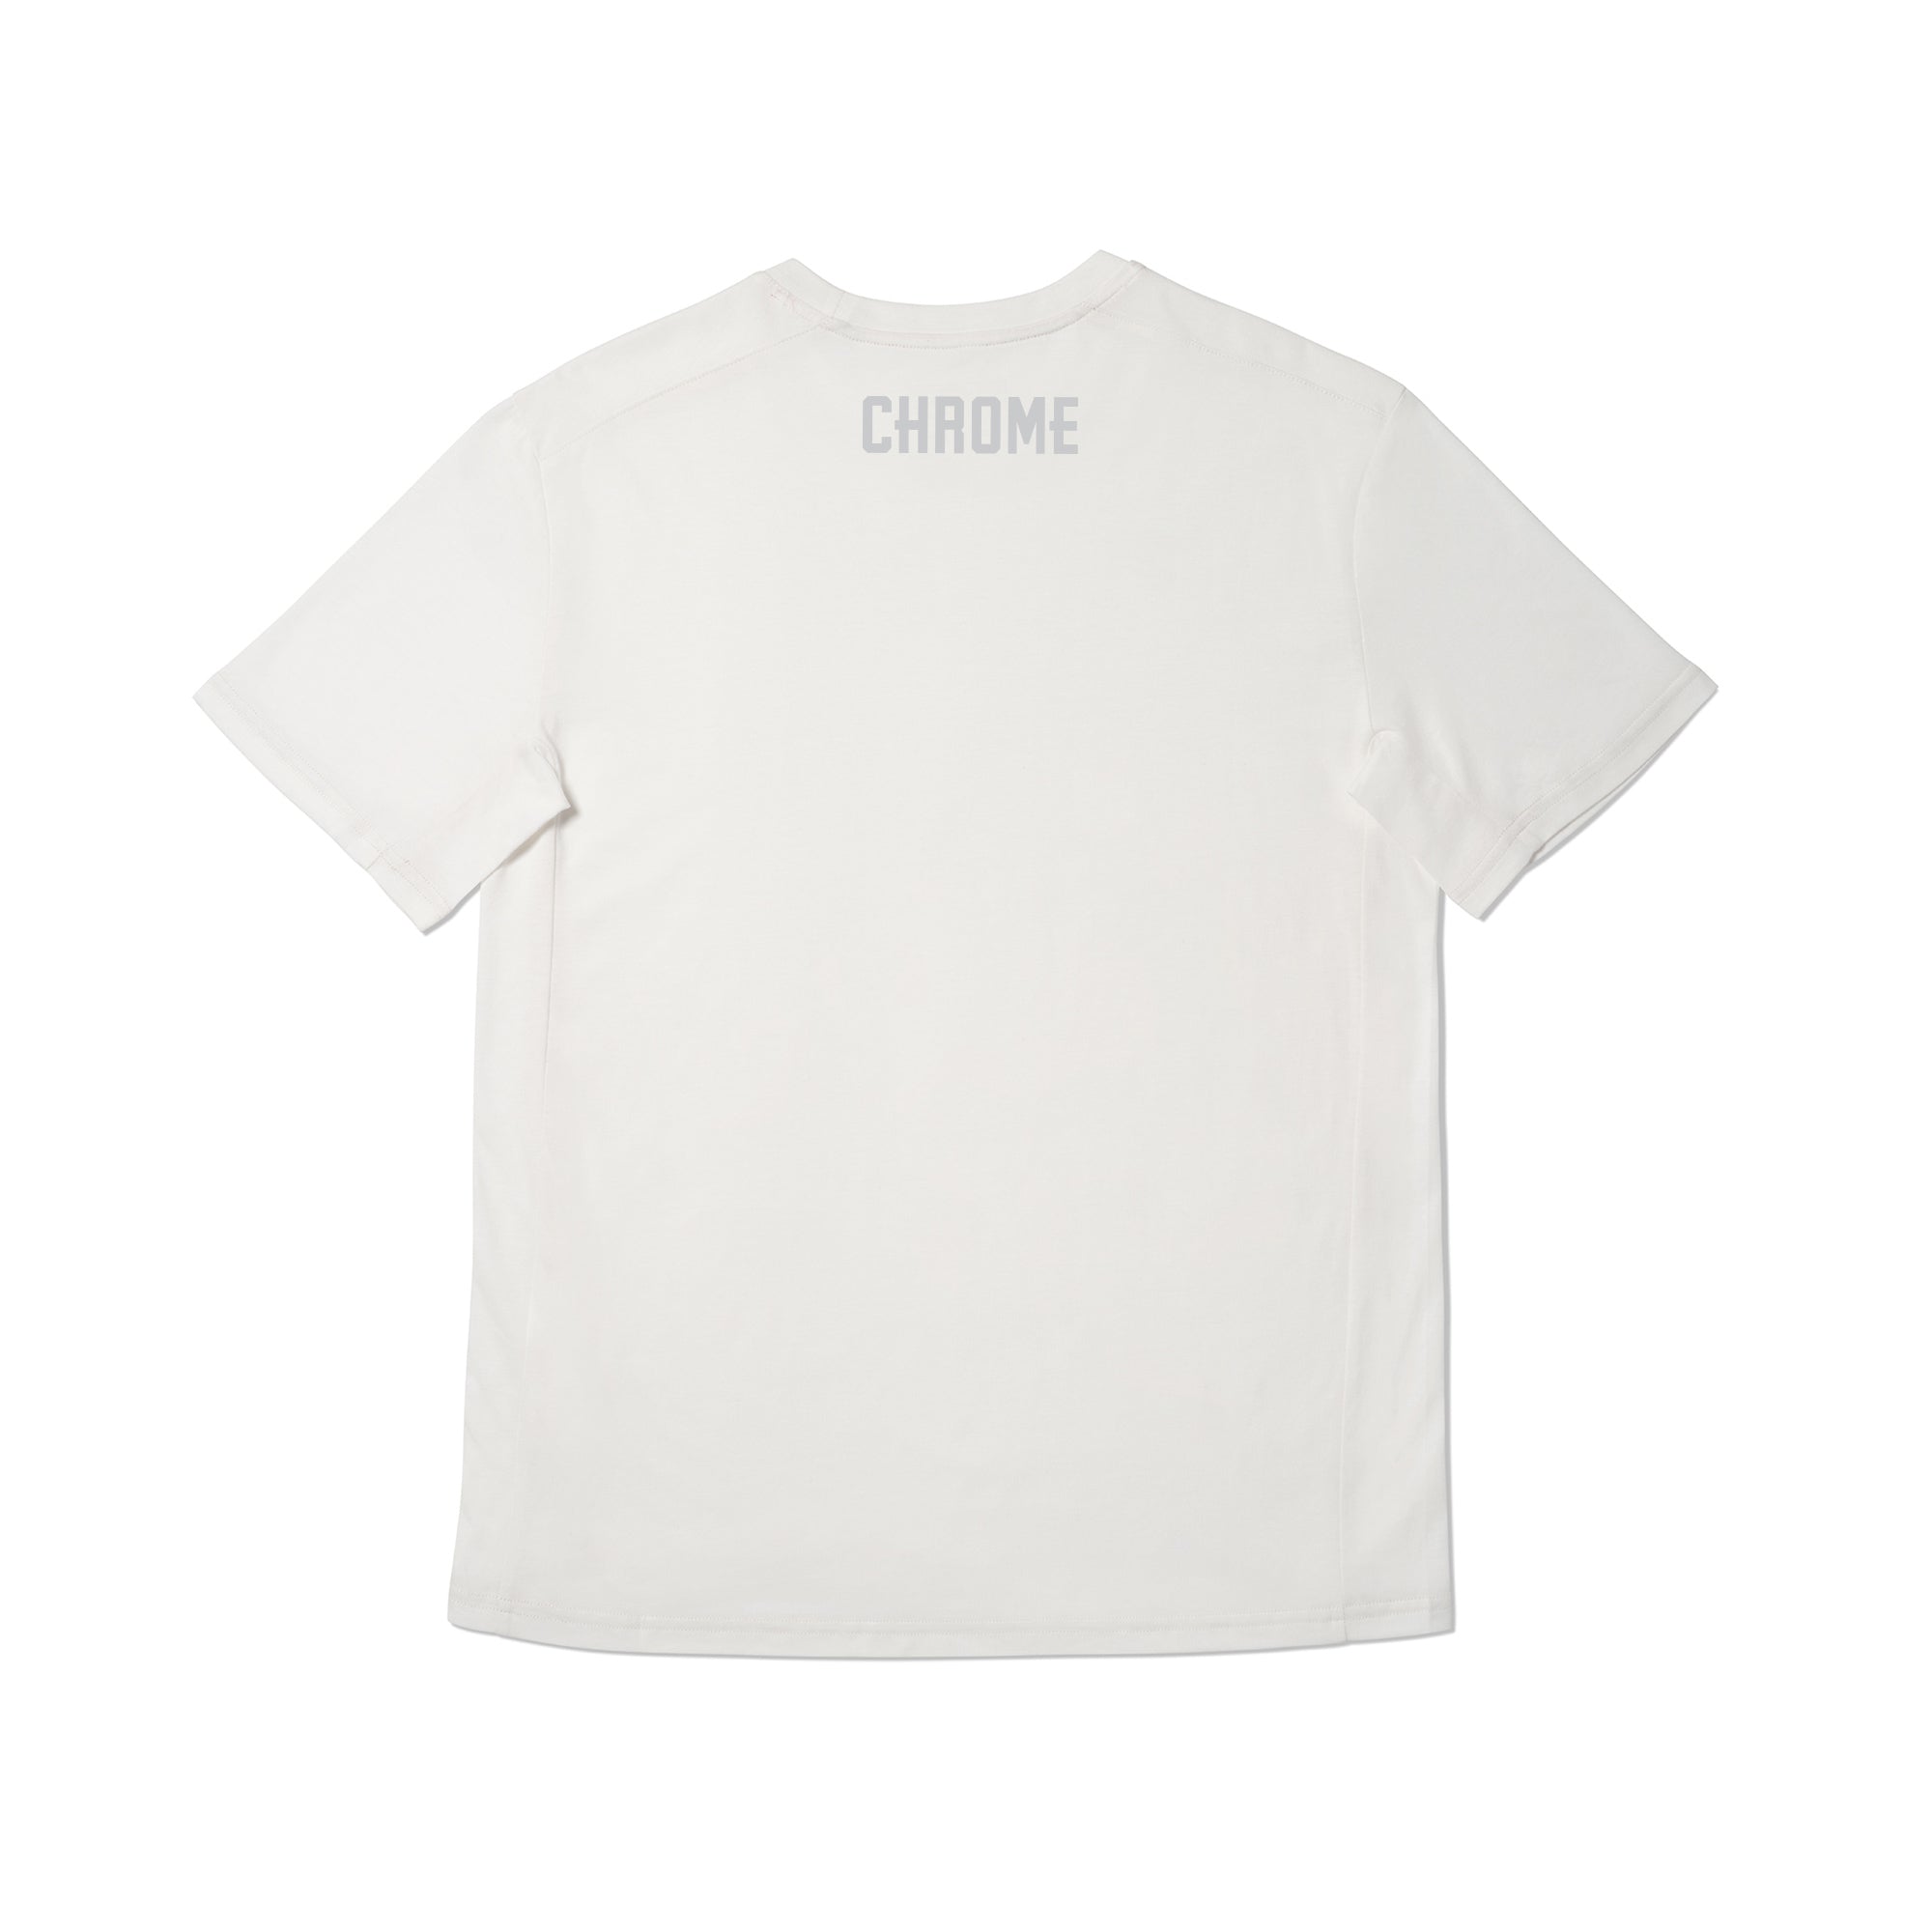 Chrome checkerboard logo tee short sleeve in white back view #color_white